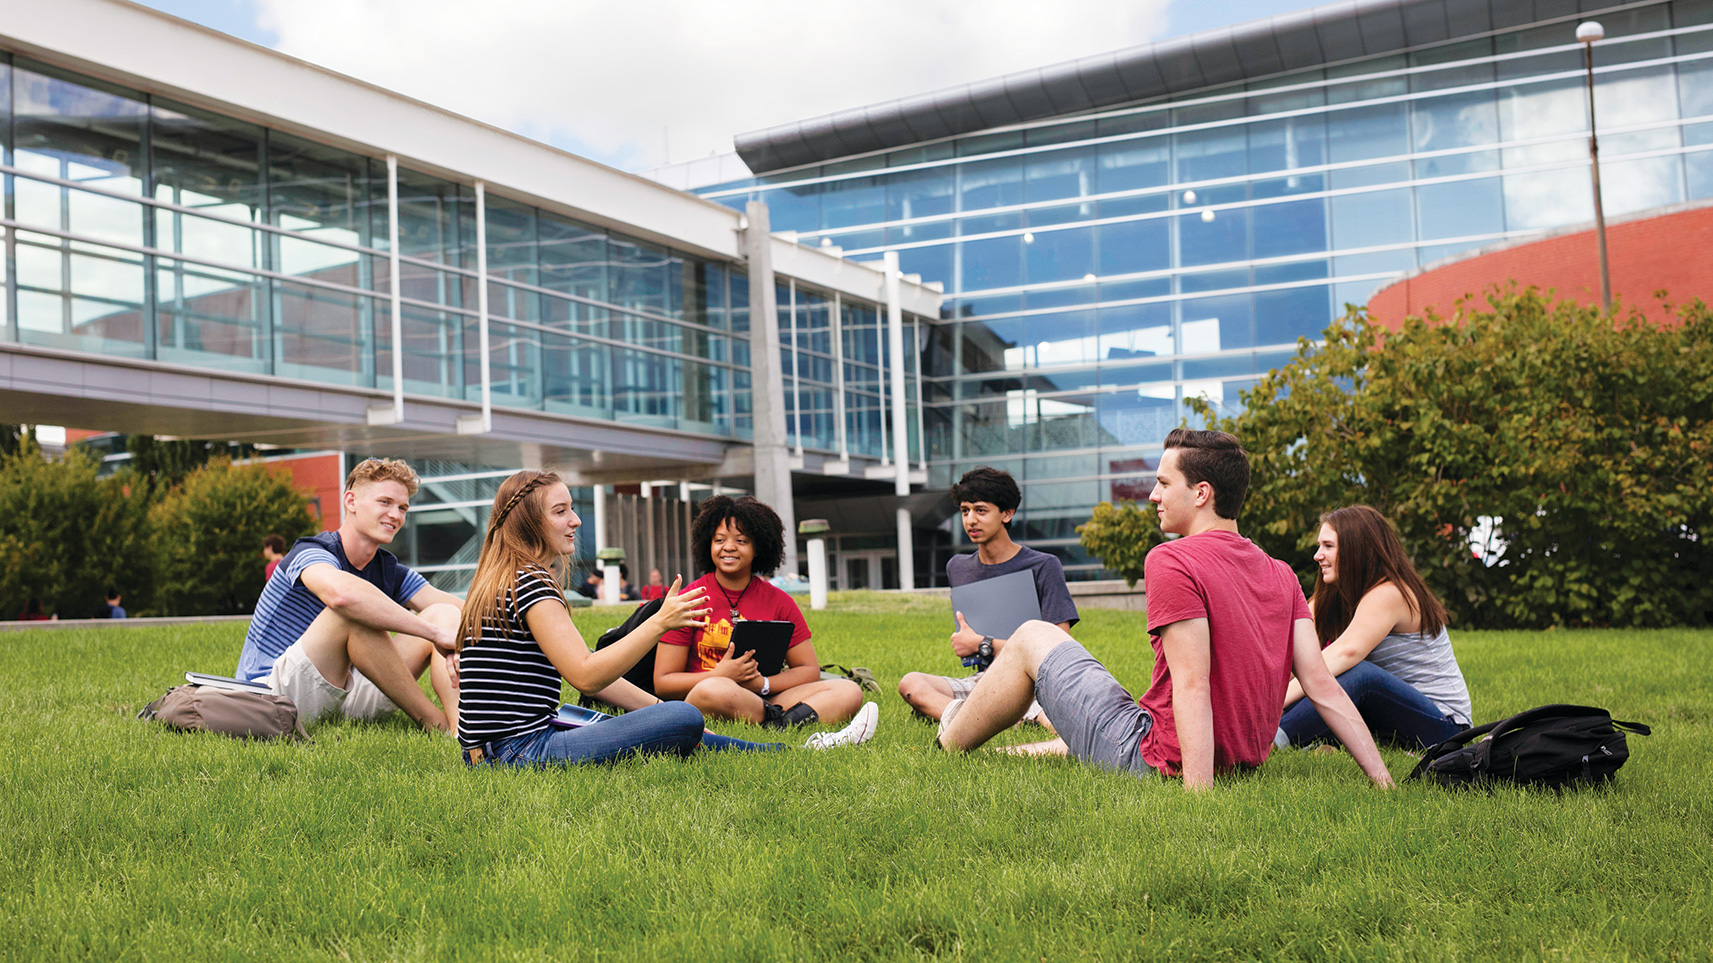 students interacting in a grassy outdoor area